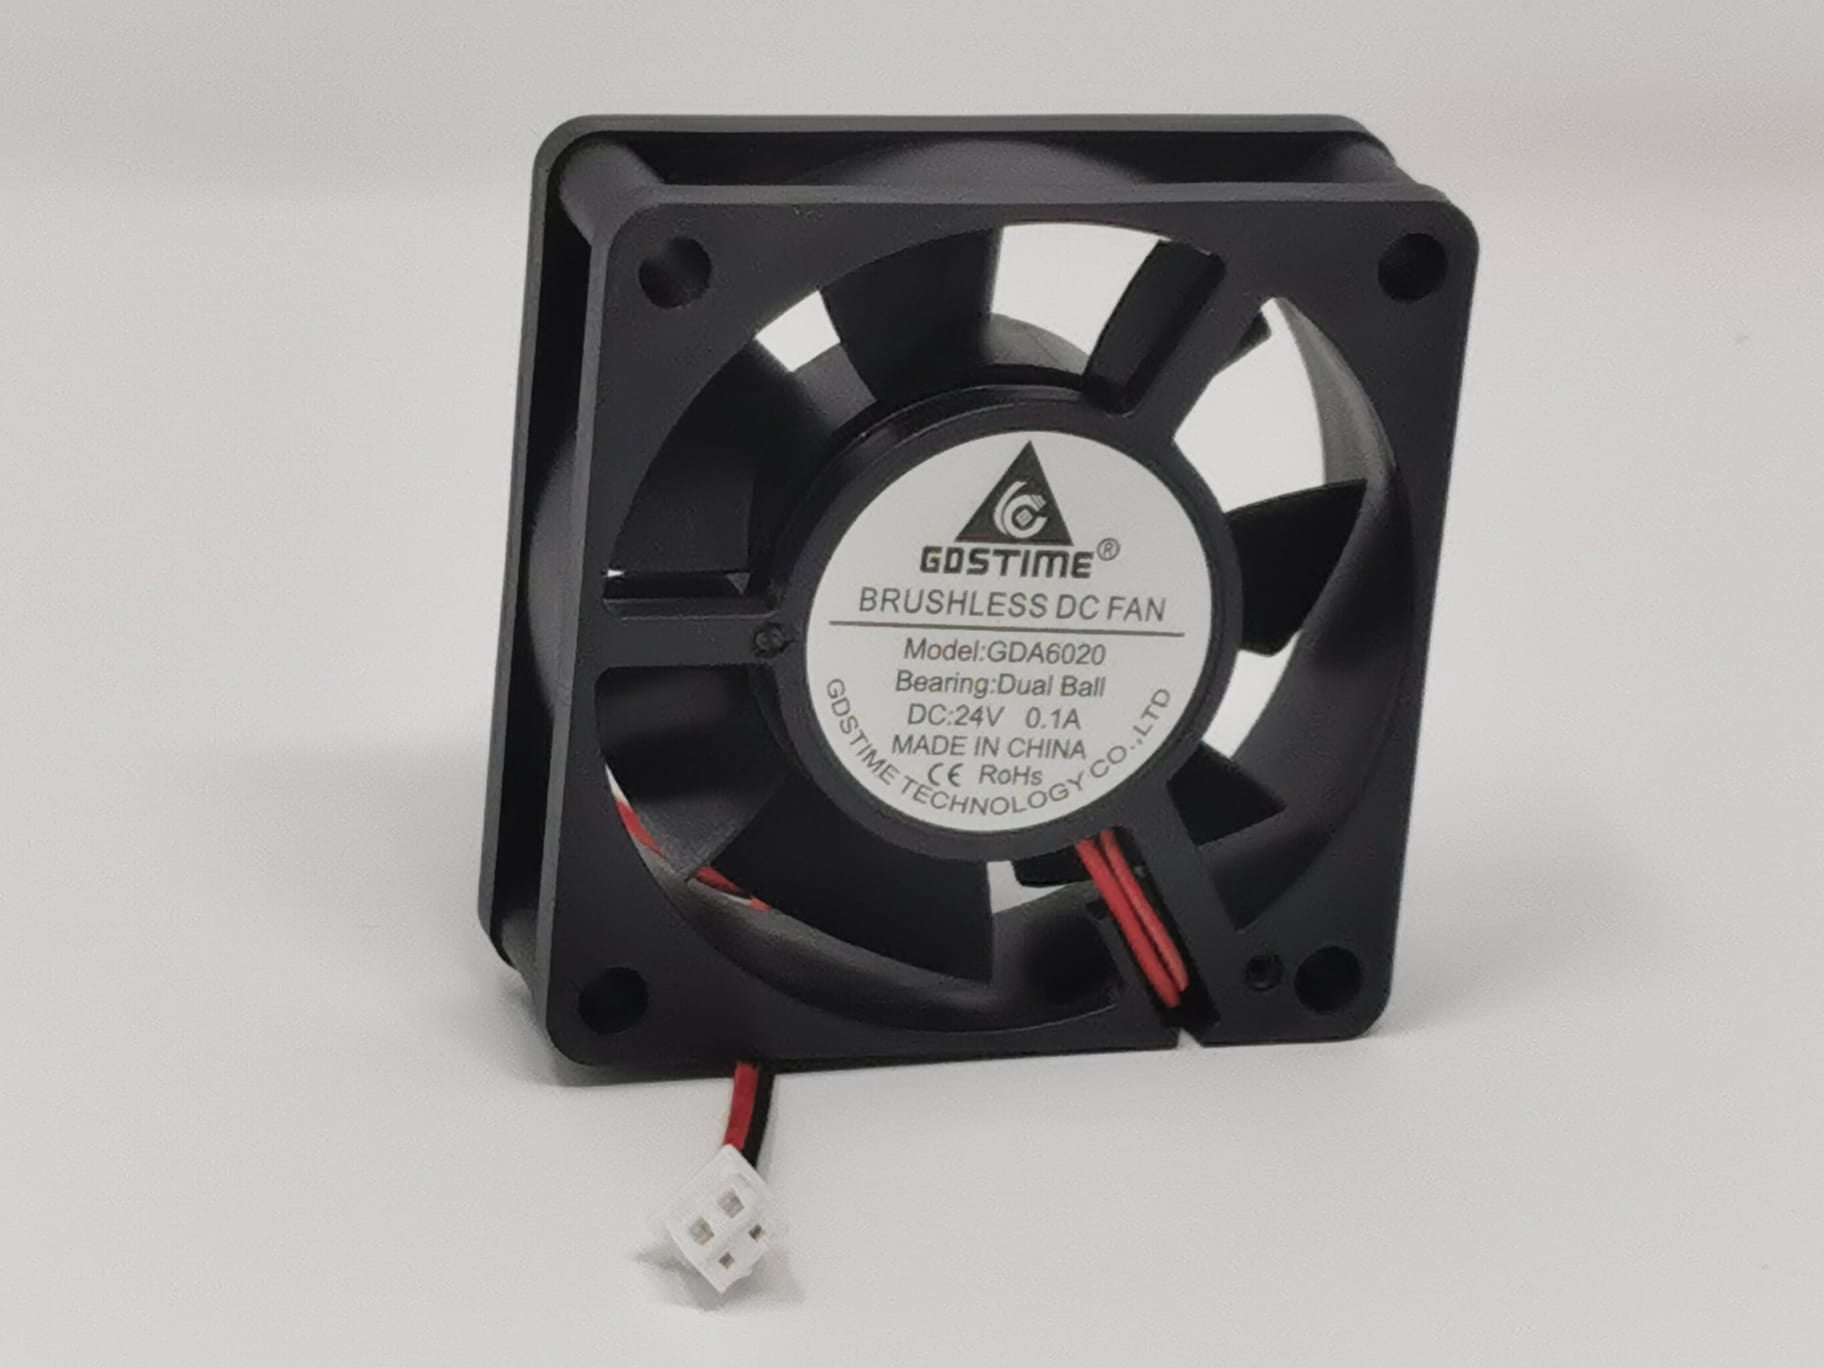 Brushless DC 6020 Axial Fans (1 pack)